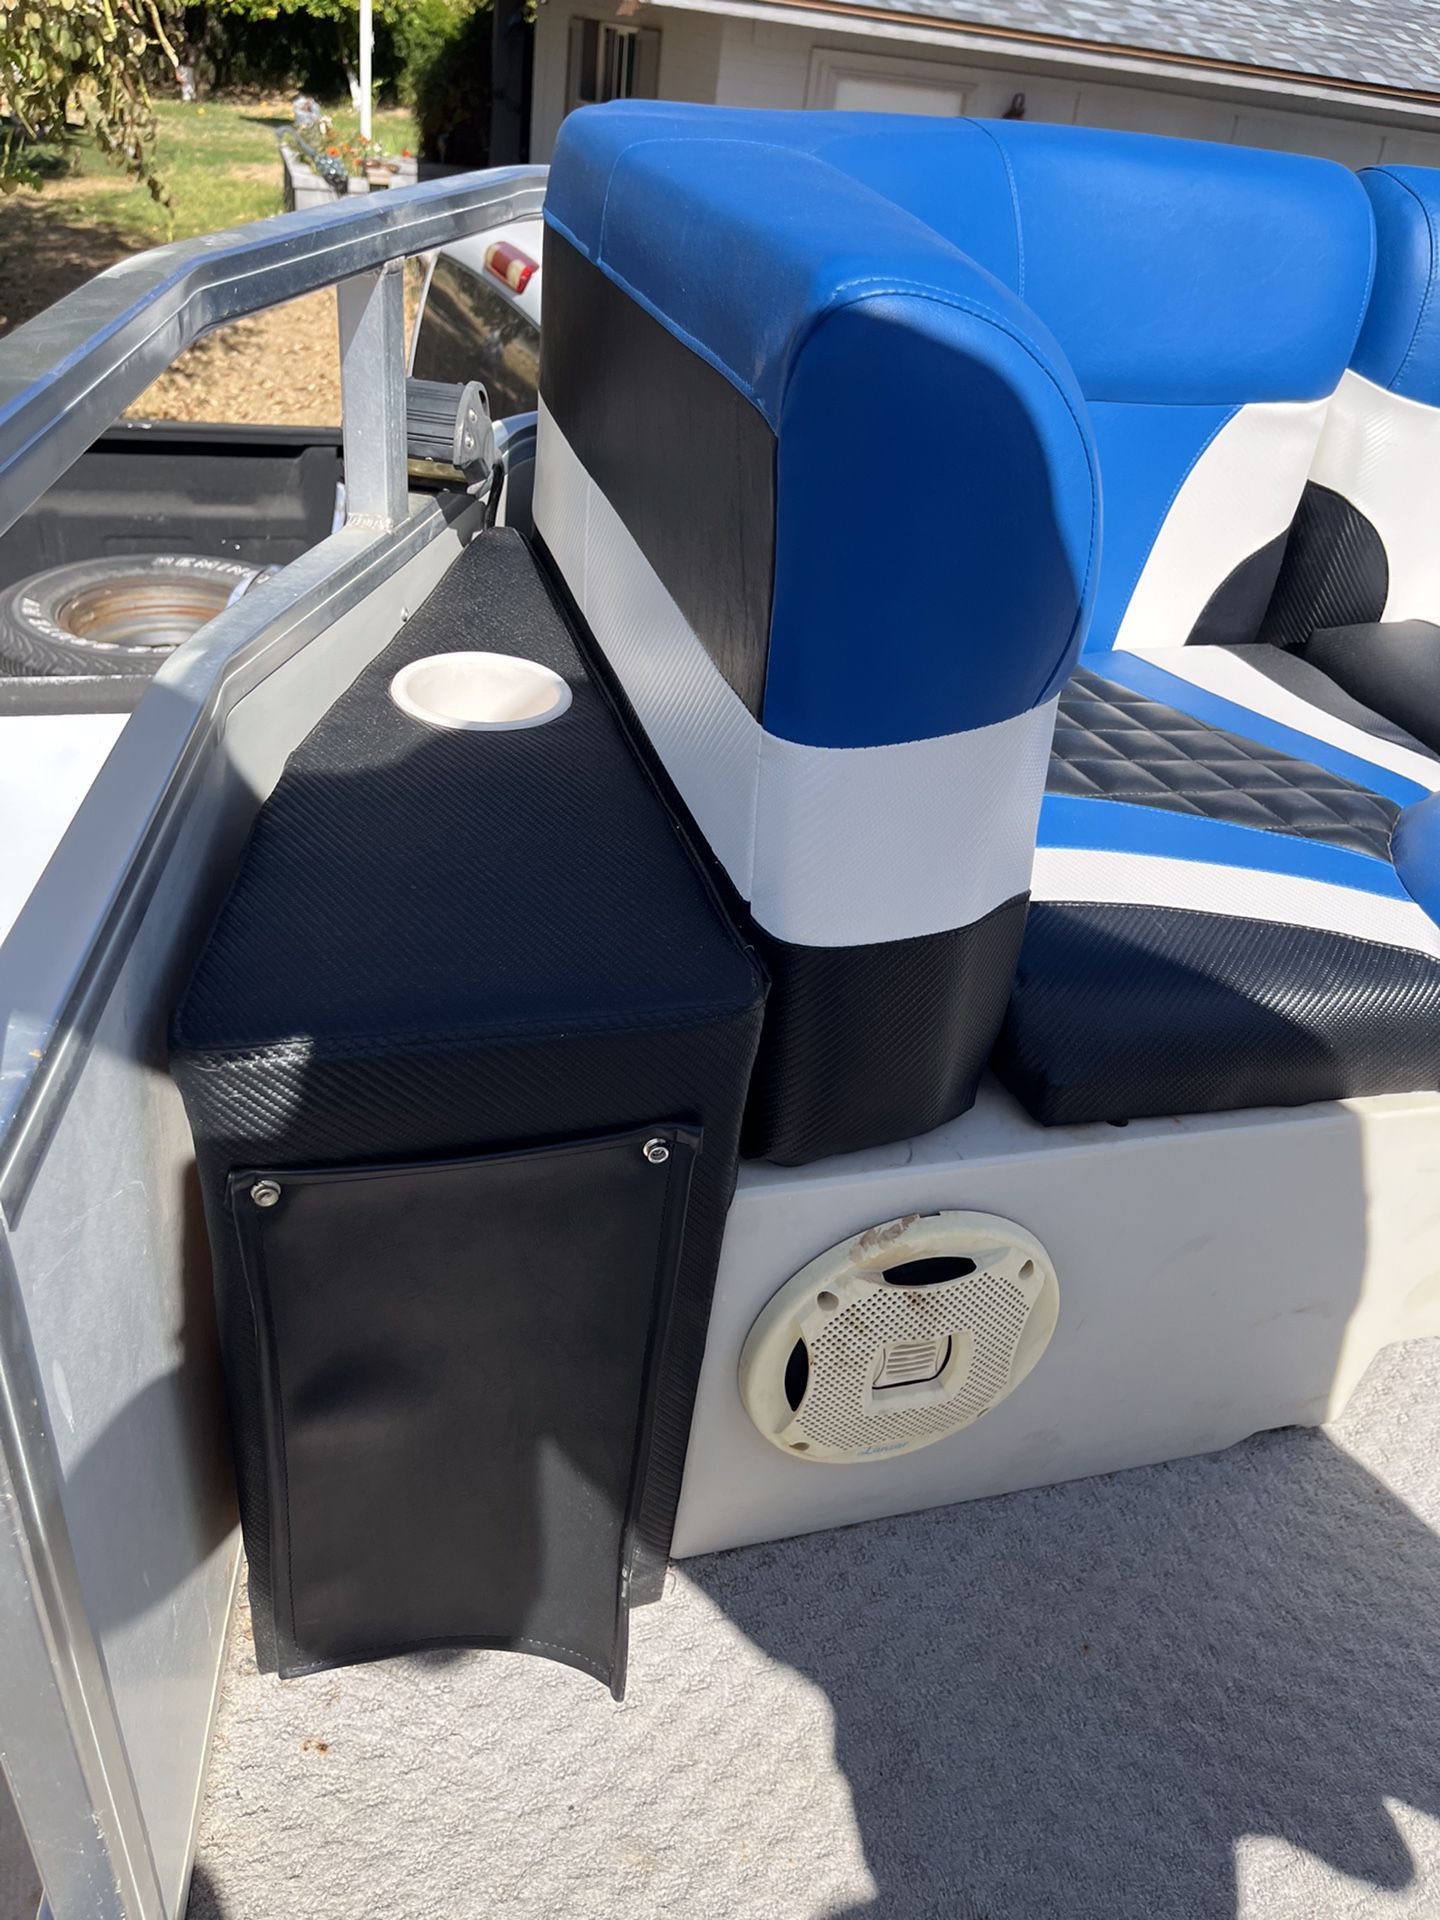 Boat Furniture: Armrests, Sinks/Counters, Seat Bases